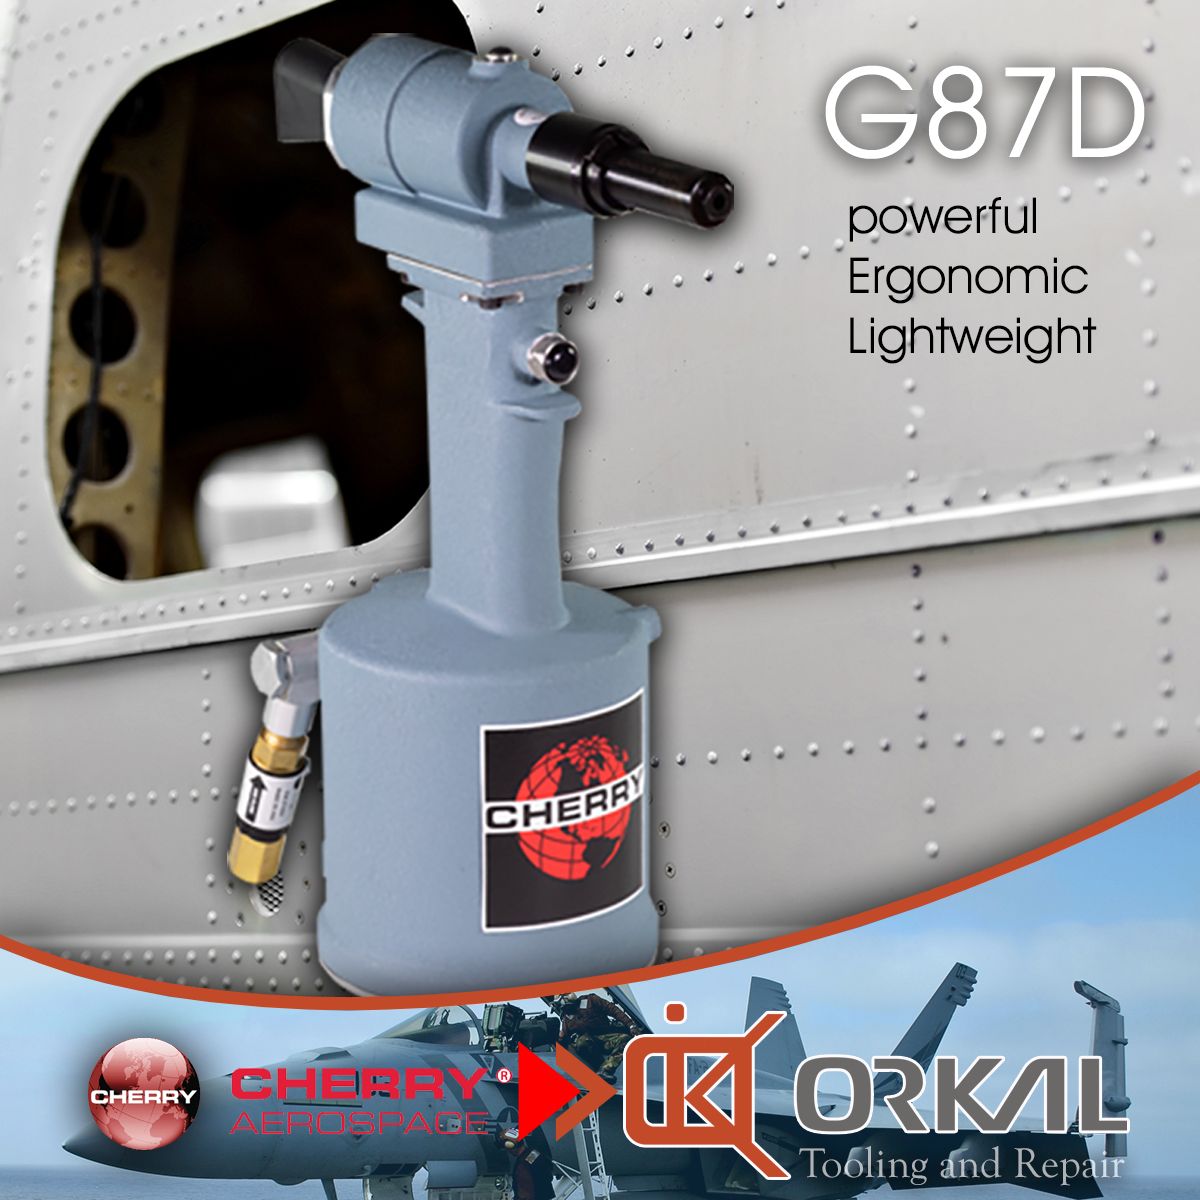 orkal, image showcasing cherry aerospace's ergonomic, lightweight g87d rivet gun beside aircraft fuselage. featuring logos: cherry aerospace and orkal industries. cutting-edge aerospace assembly tool exemplifying precision, efficiency, and compliance in fluid transfer systems and repair services.